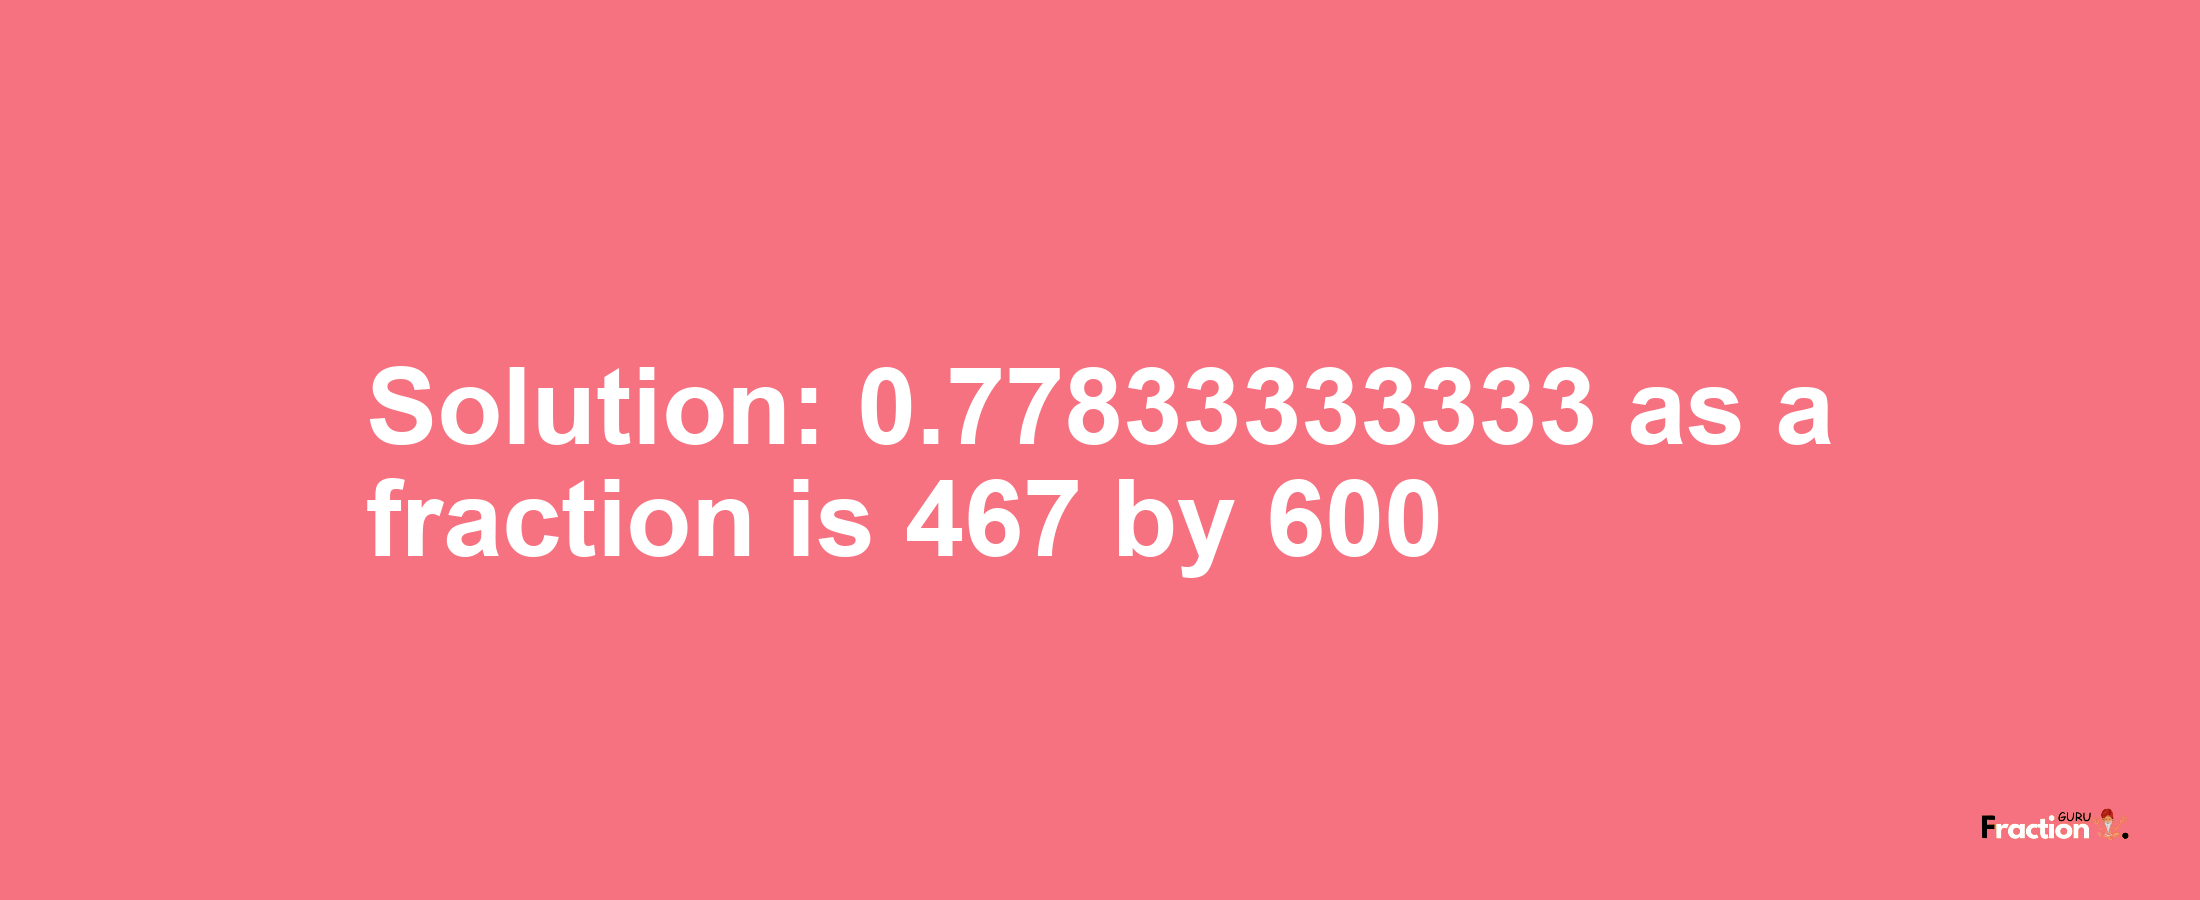 Solution:0.77833333333 as a fraction is 467/600